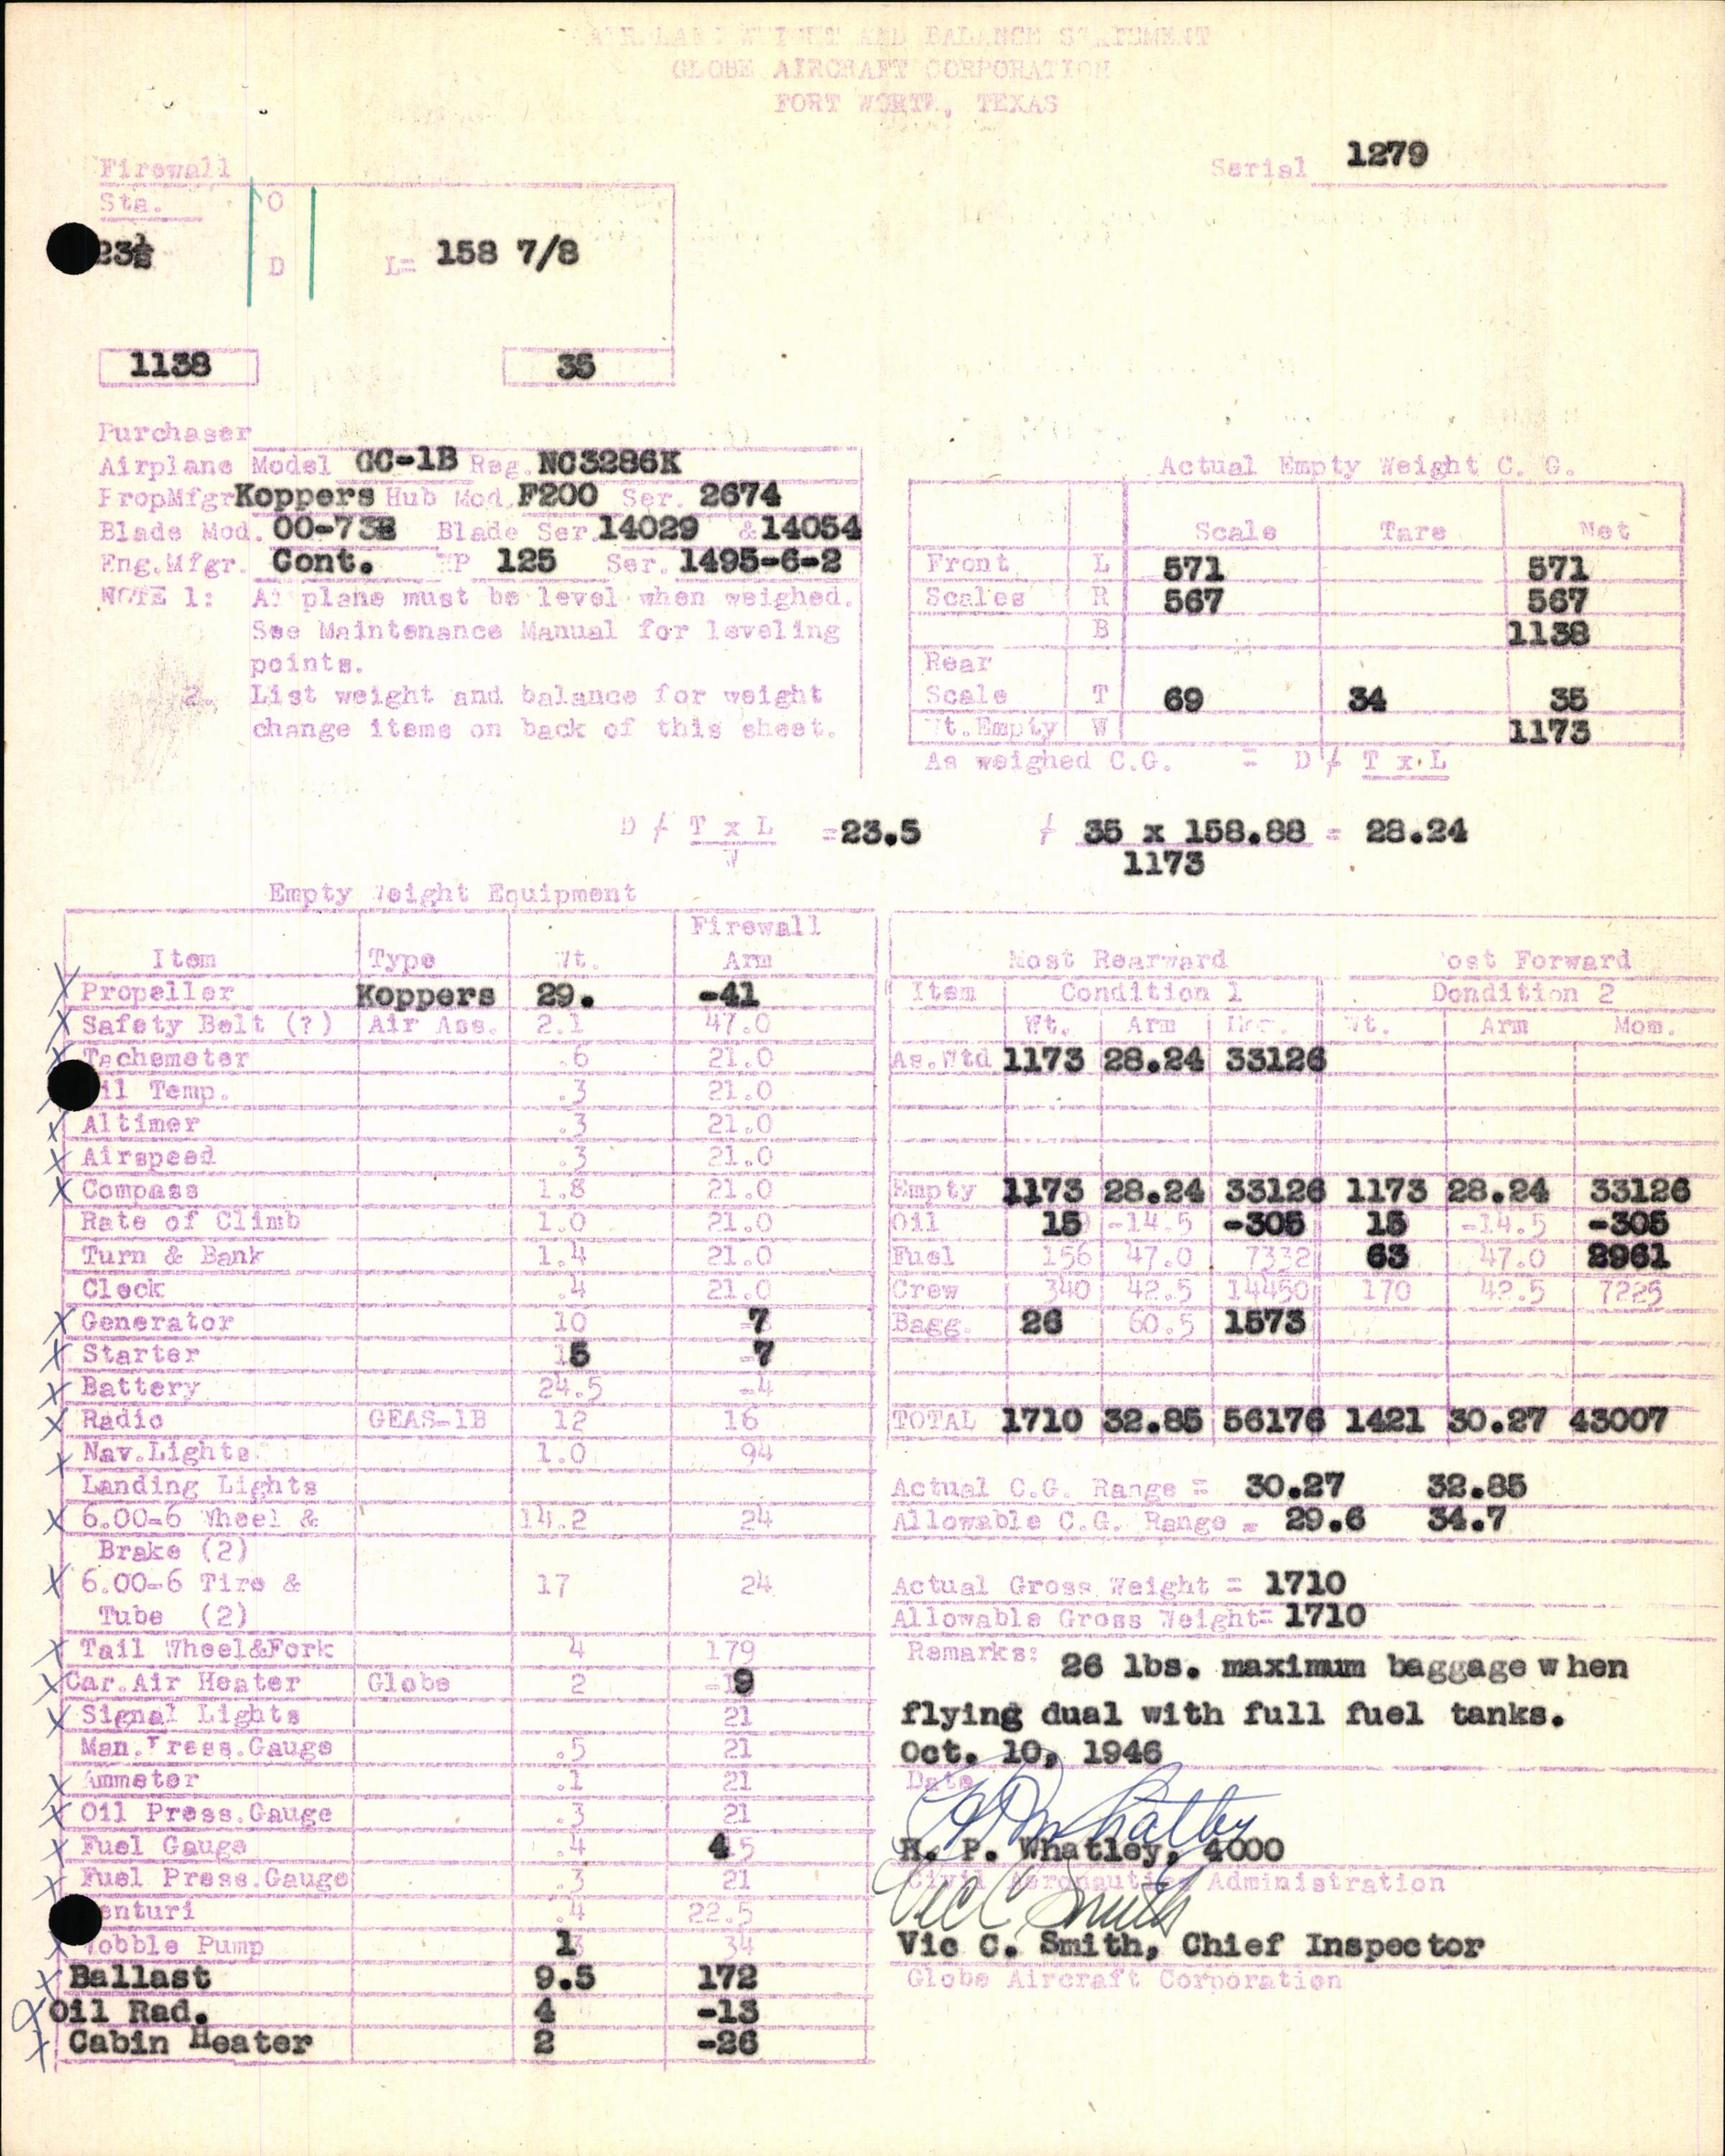 Sample page 7 from AirCorps Library document: Technical Information for Serial Number 1279